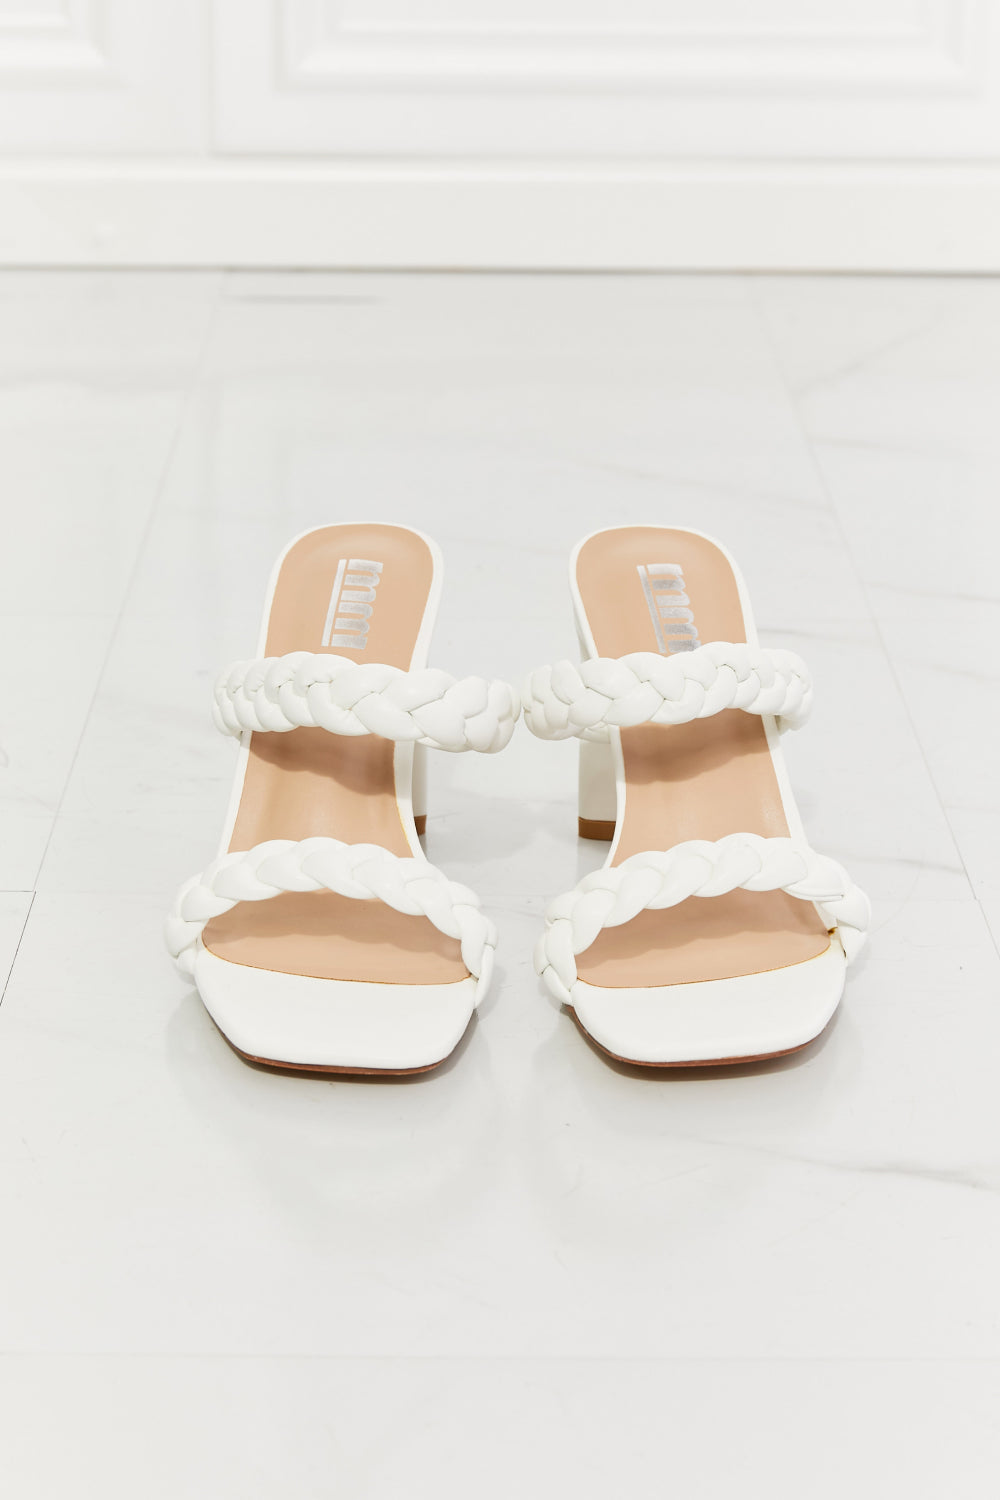 MMShoes In Love Double Braided Block Heel Sandal in White - Thandynie